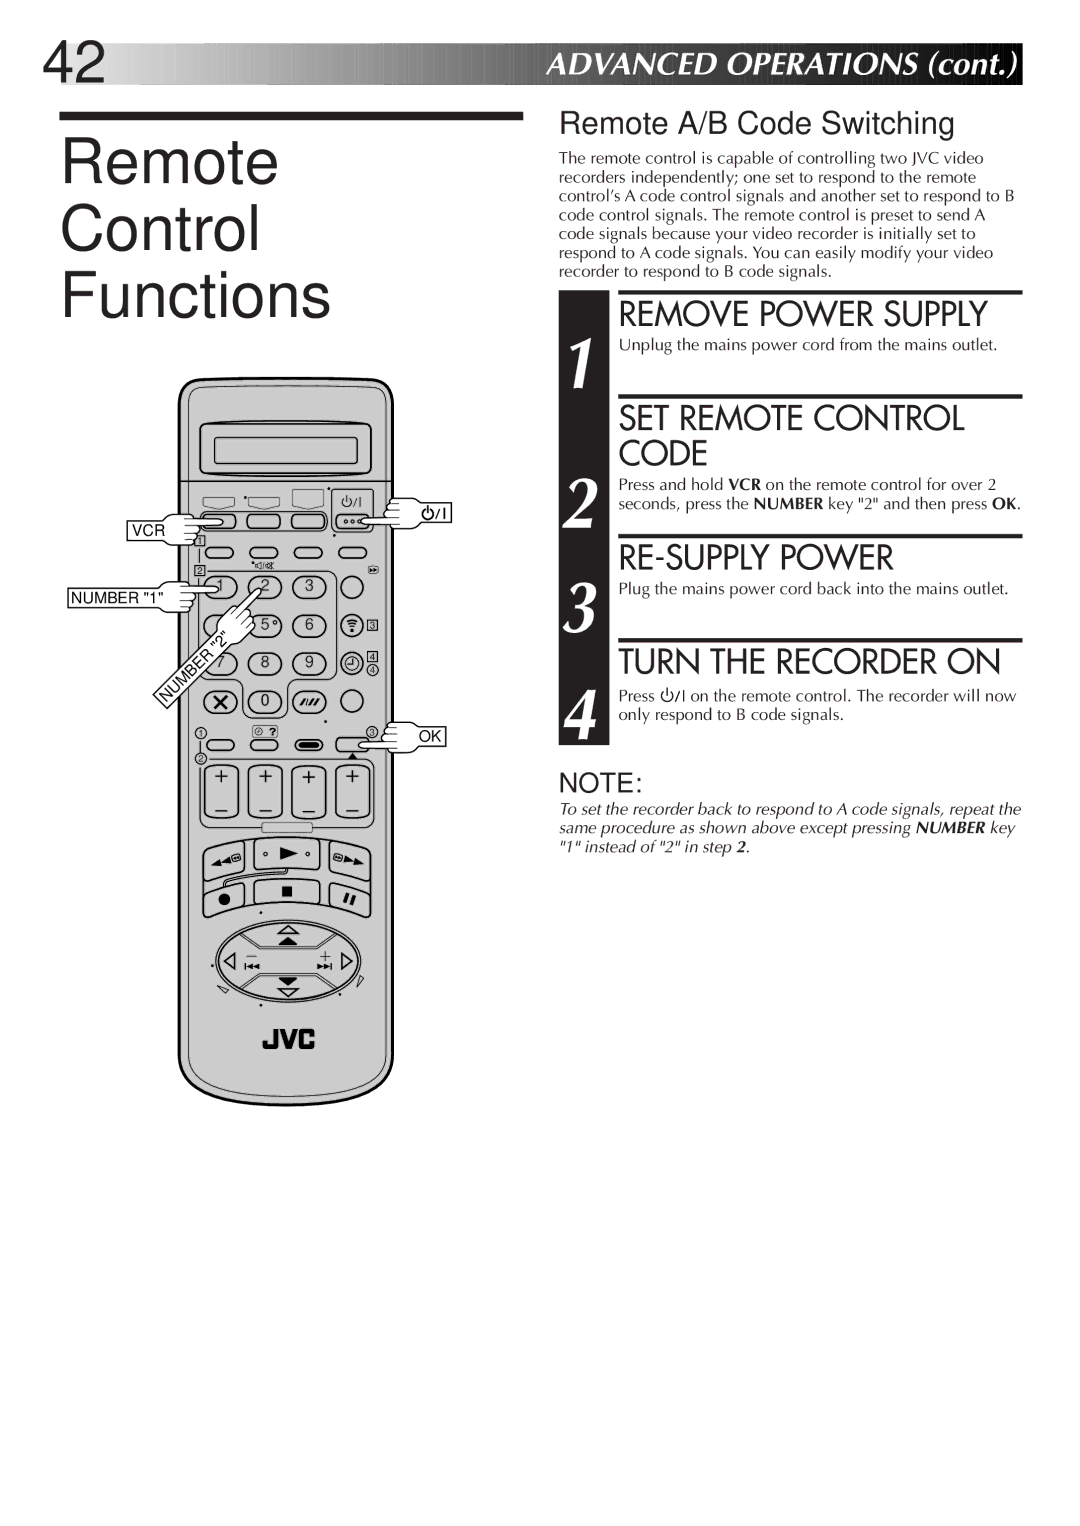 JVC LPT0319-001A, HR-S8700EK Remote Control Functions, Remove Power Supply, SET Remote Control Code, RE-SUPPLY Power 